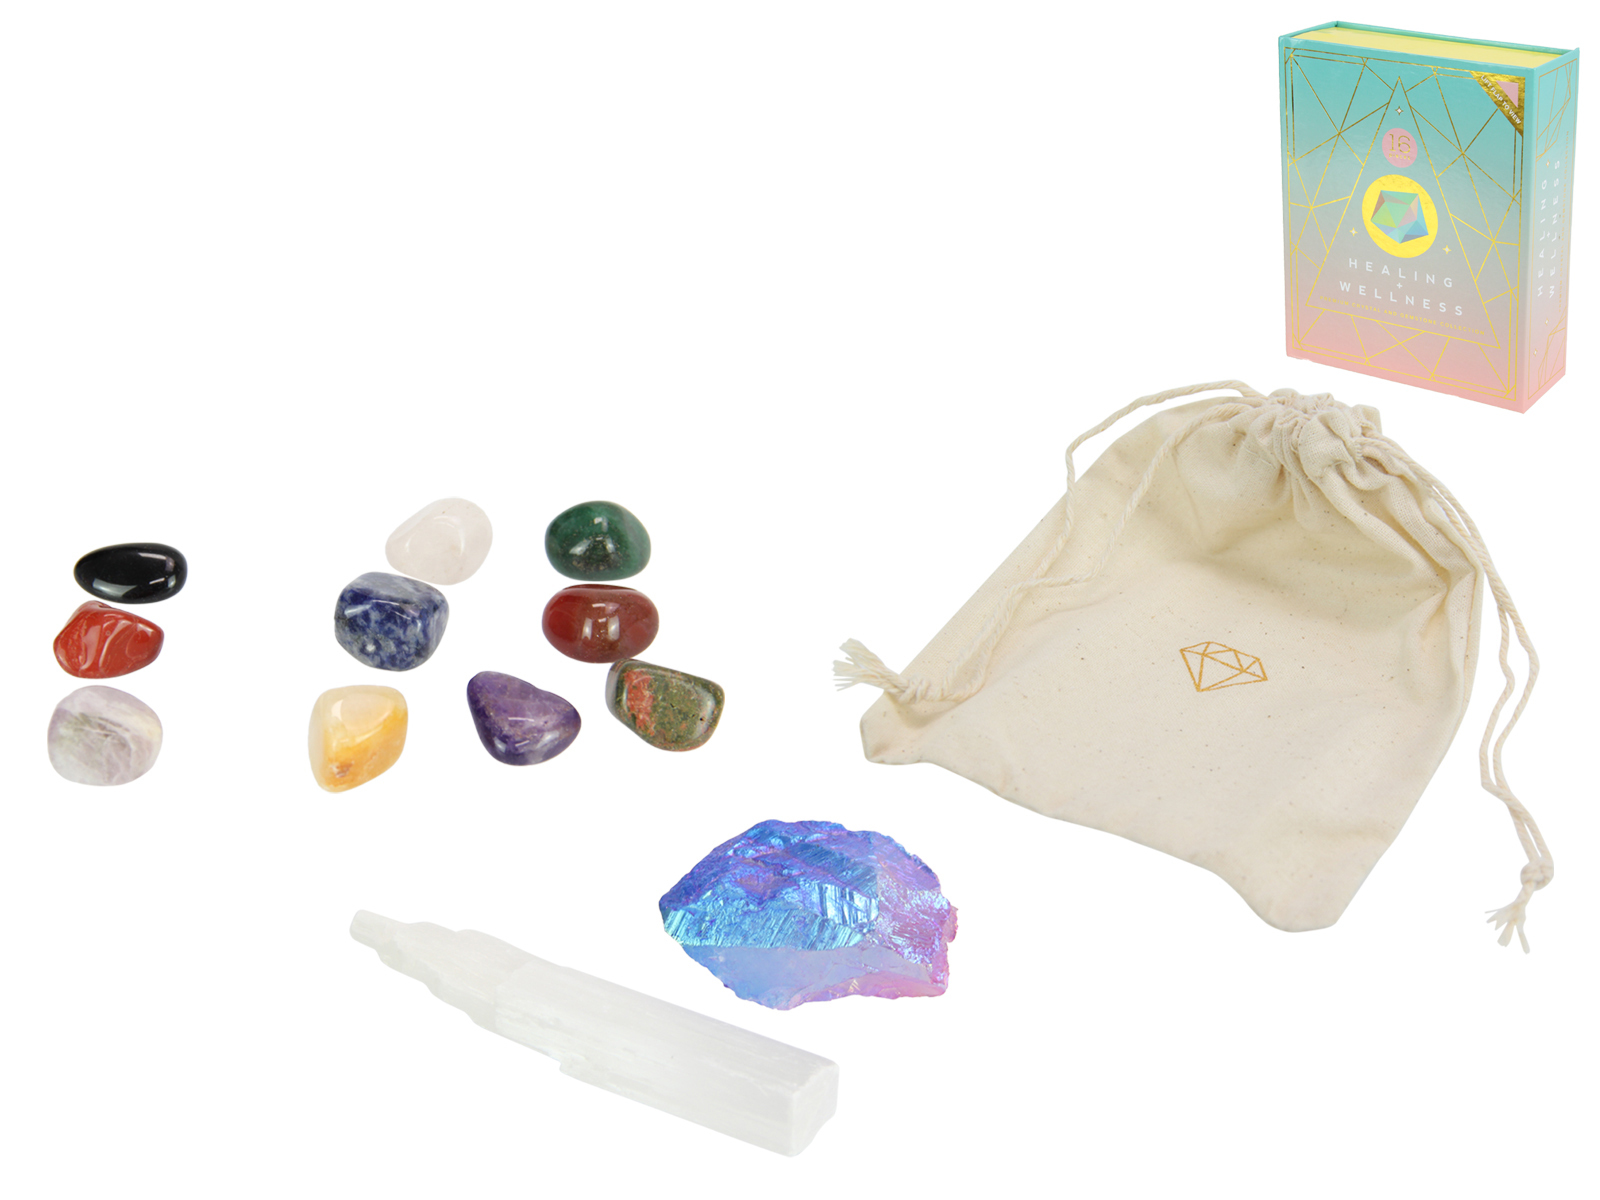 Wellness Crystal Gemstone Kit 20x17cm All In Gift Box 16 Pieces